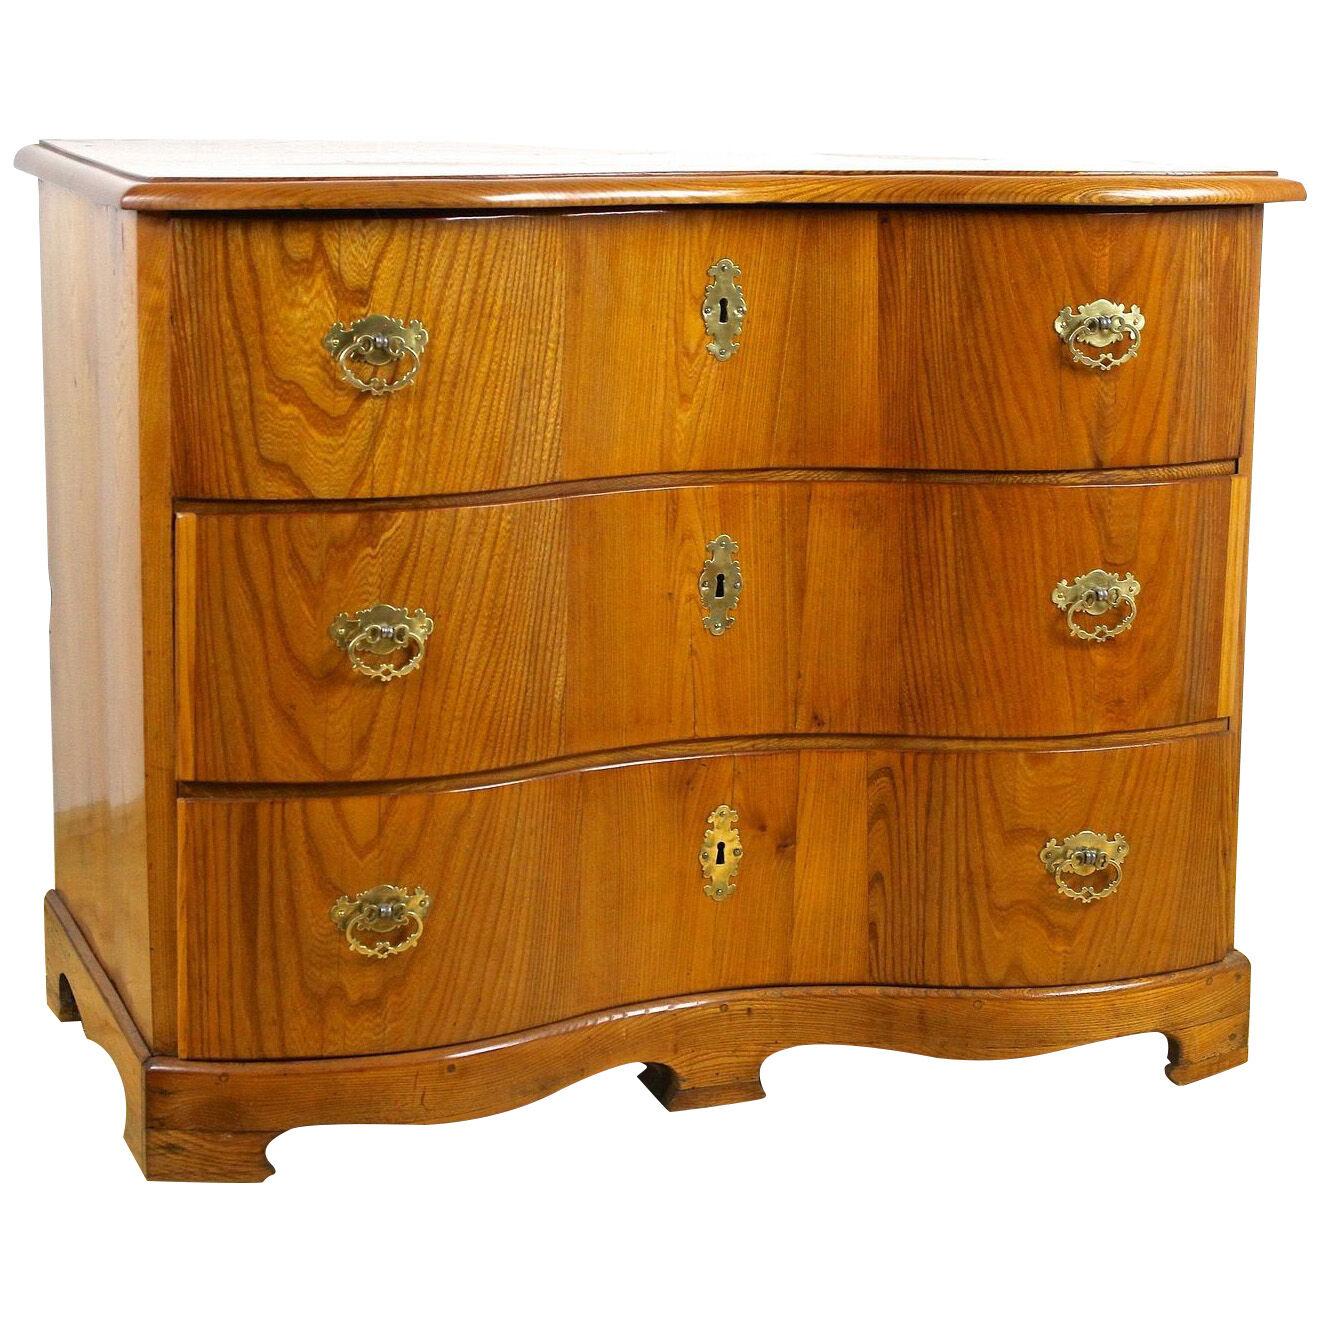 18th Century Elm Wood Baroque Chest Of Drawers, South Germany ca. 1770